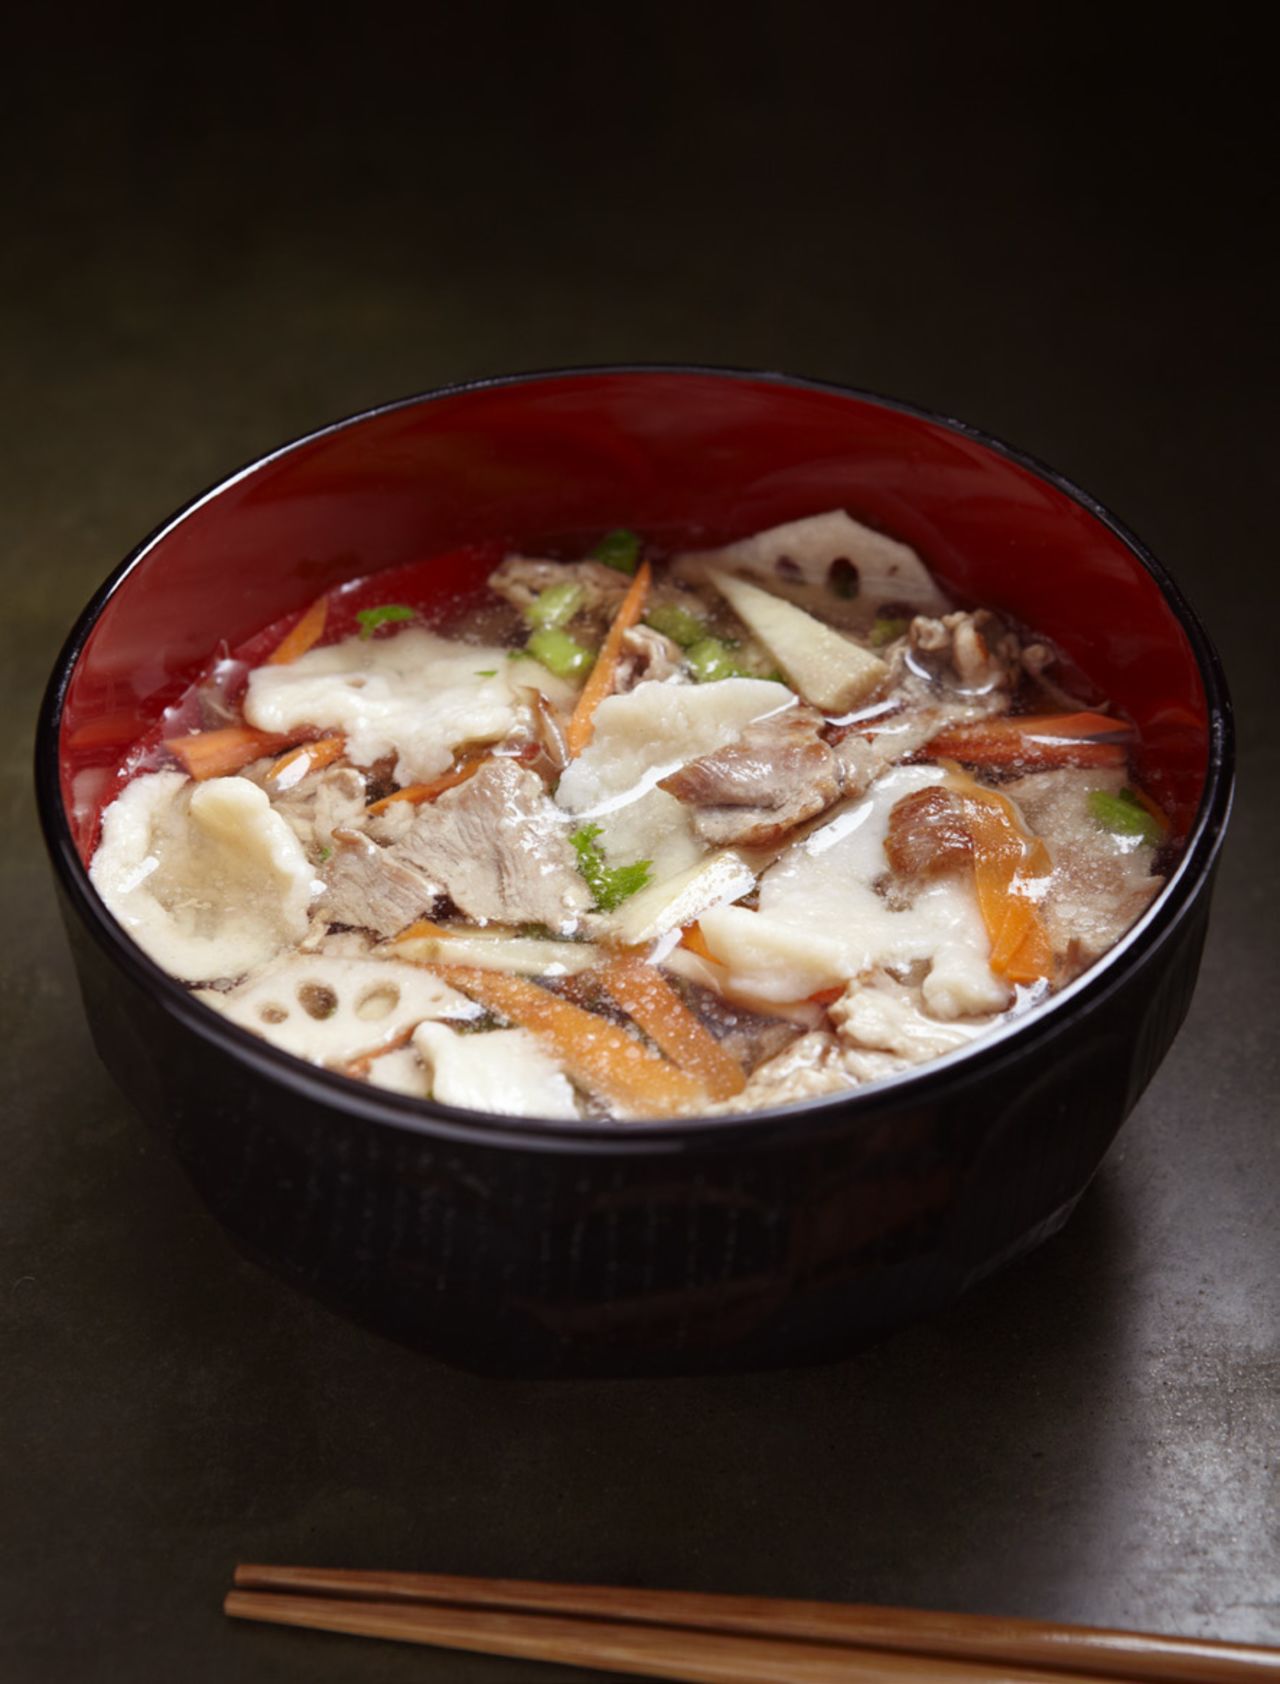 Pinched noodle soup with pork is a classic Tohoku comfort food. In local Iwate dialect, the word hittsumi means "to pinch" and describes how the noodles are made. 